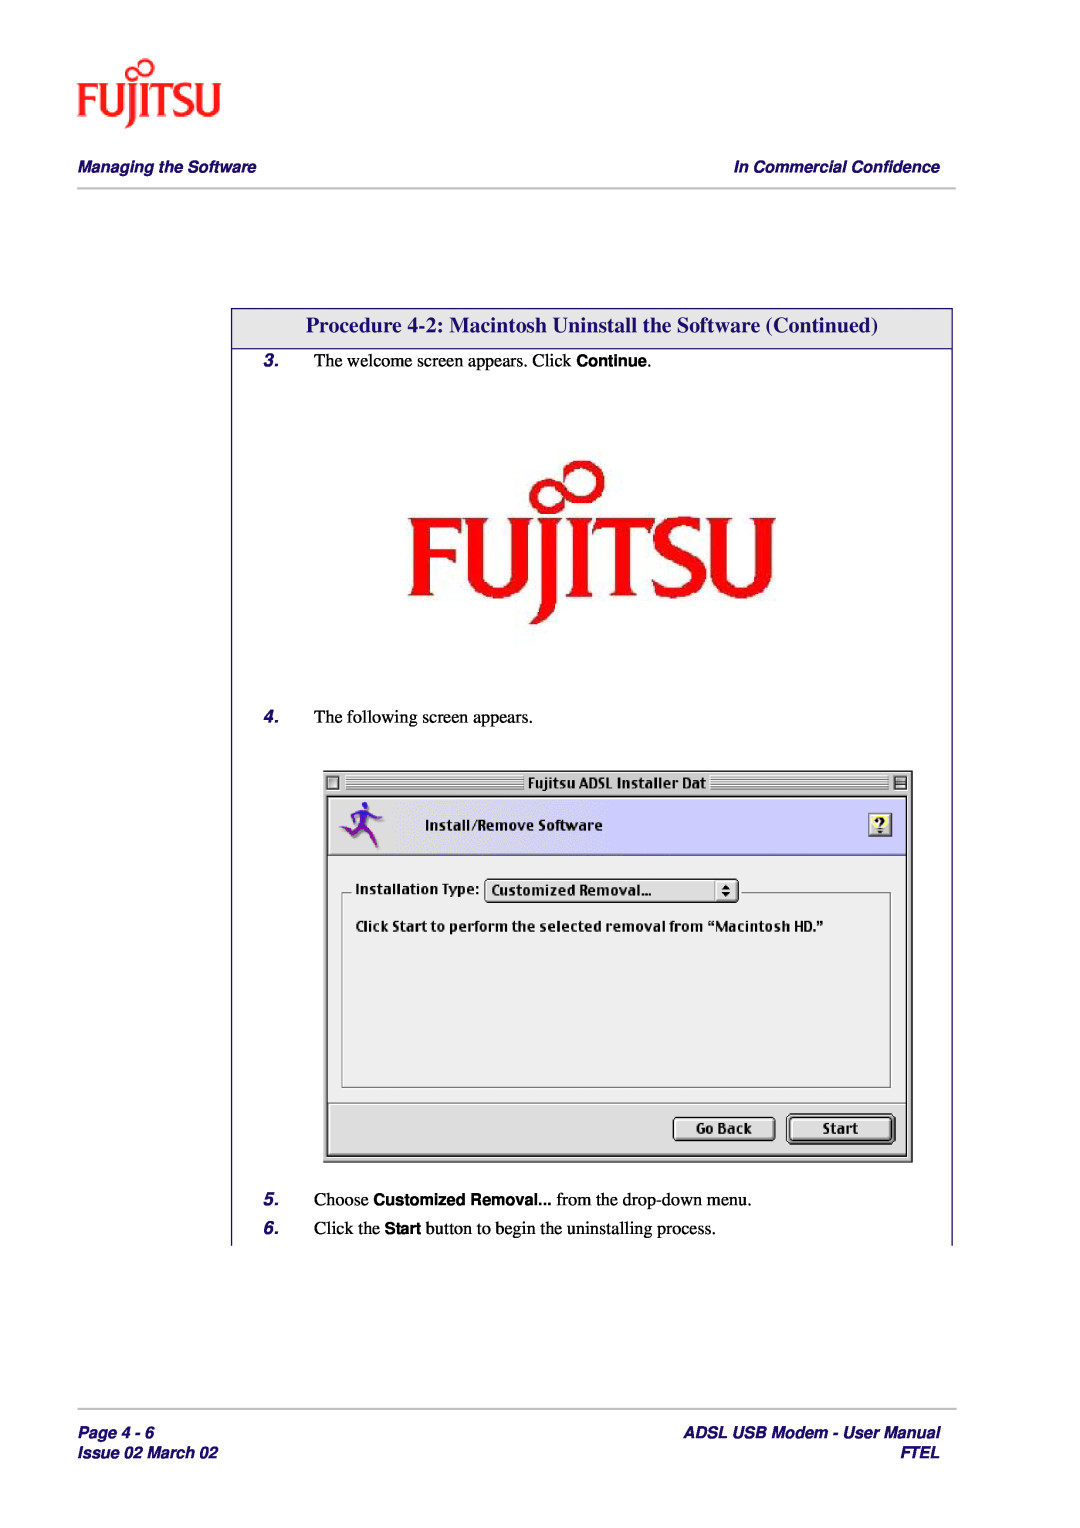 Fujitsu 3XAX-00803AAS Procedure 4-2 Macintosh Uninstall the Software Continued, Managing the Software, Page 4, Ftel 